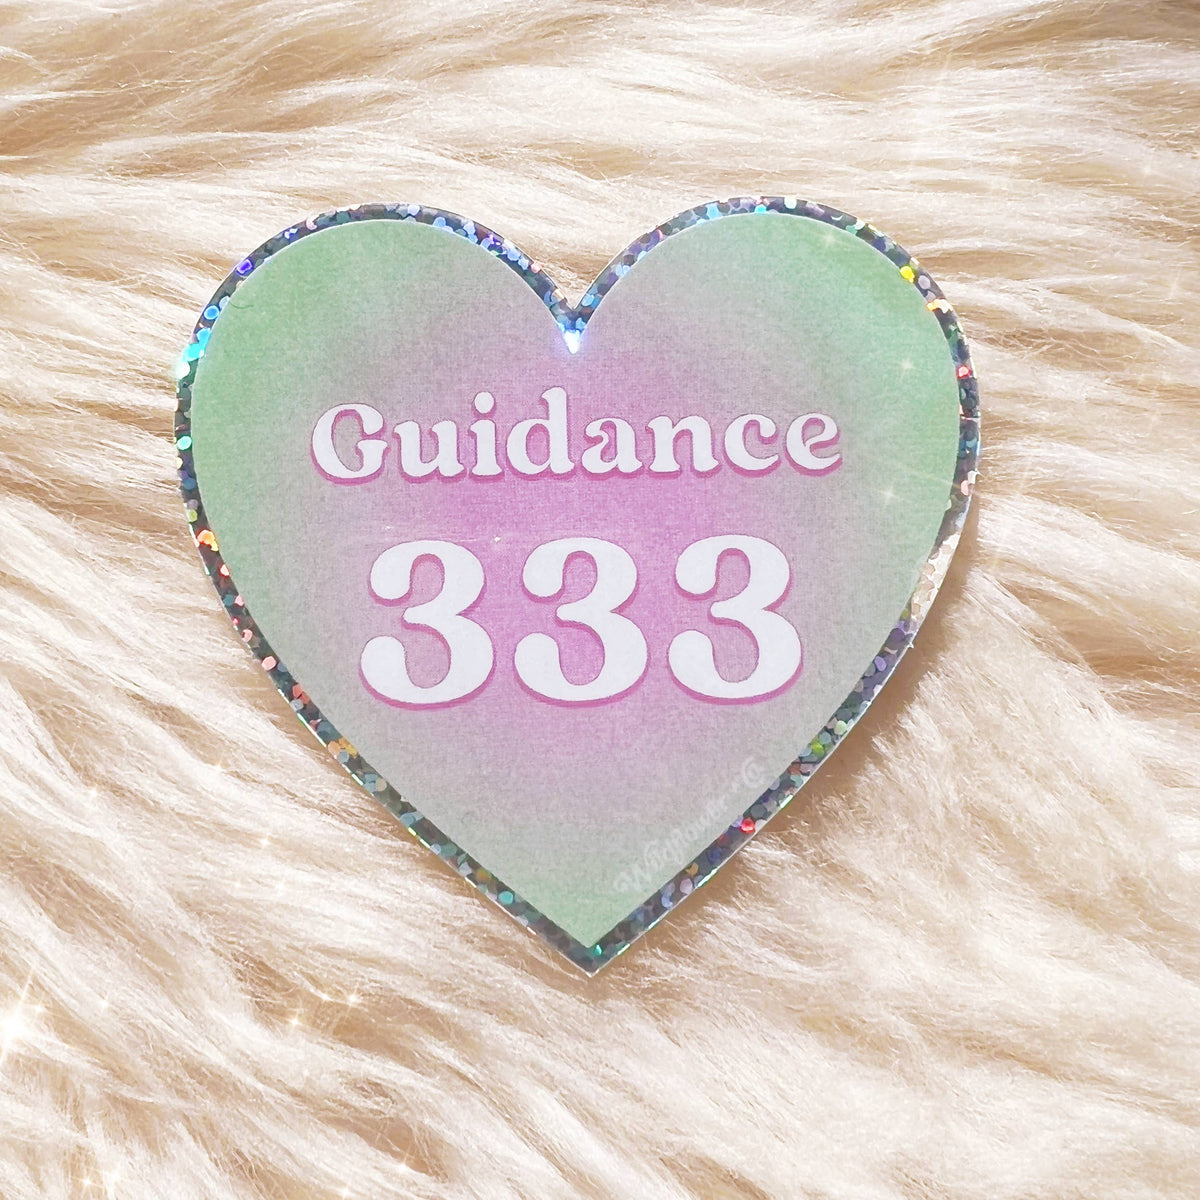 Angel Number Heart Sticker - Manifest Protection Alignment +